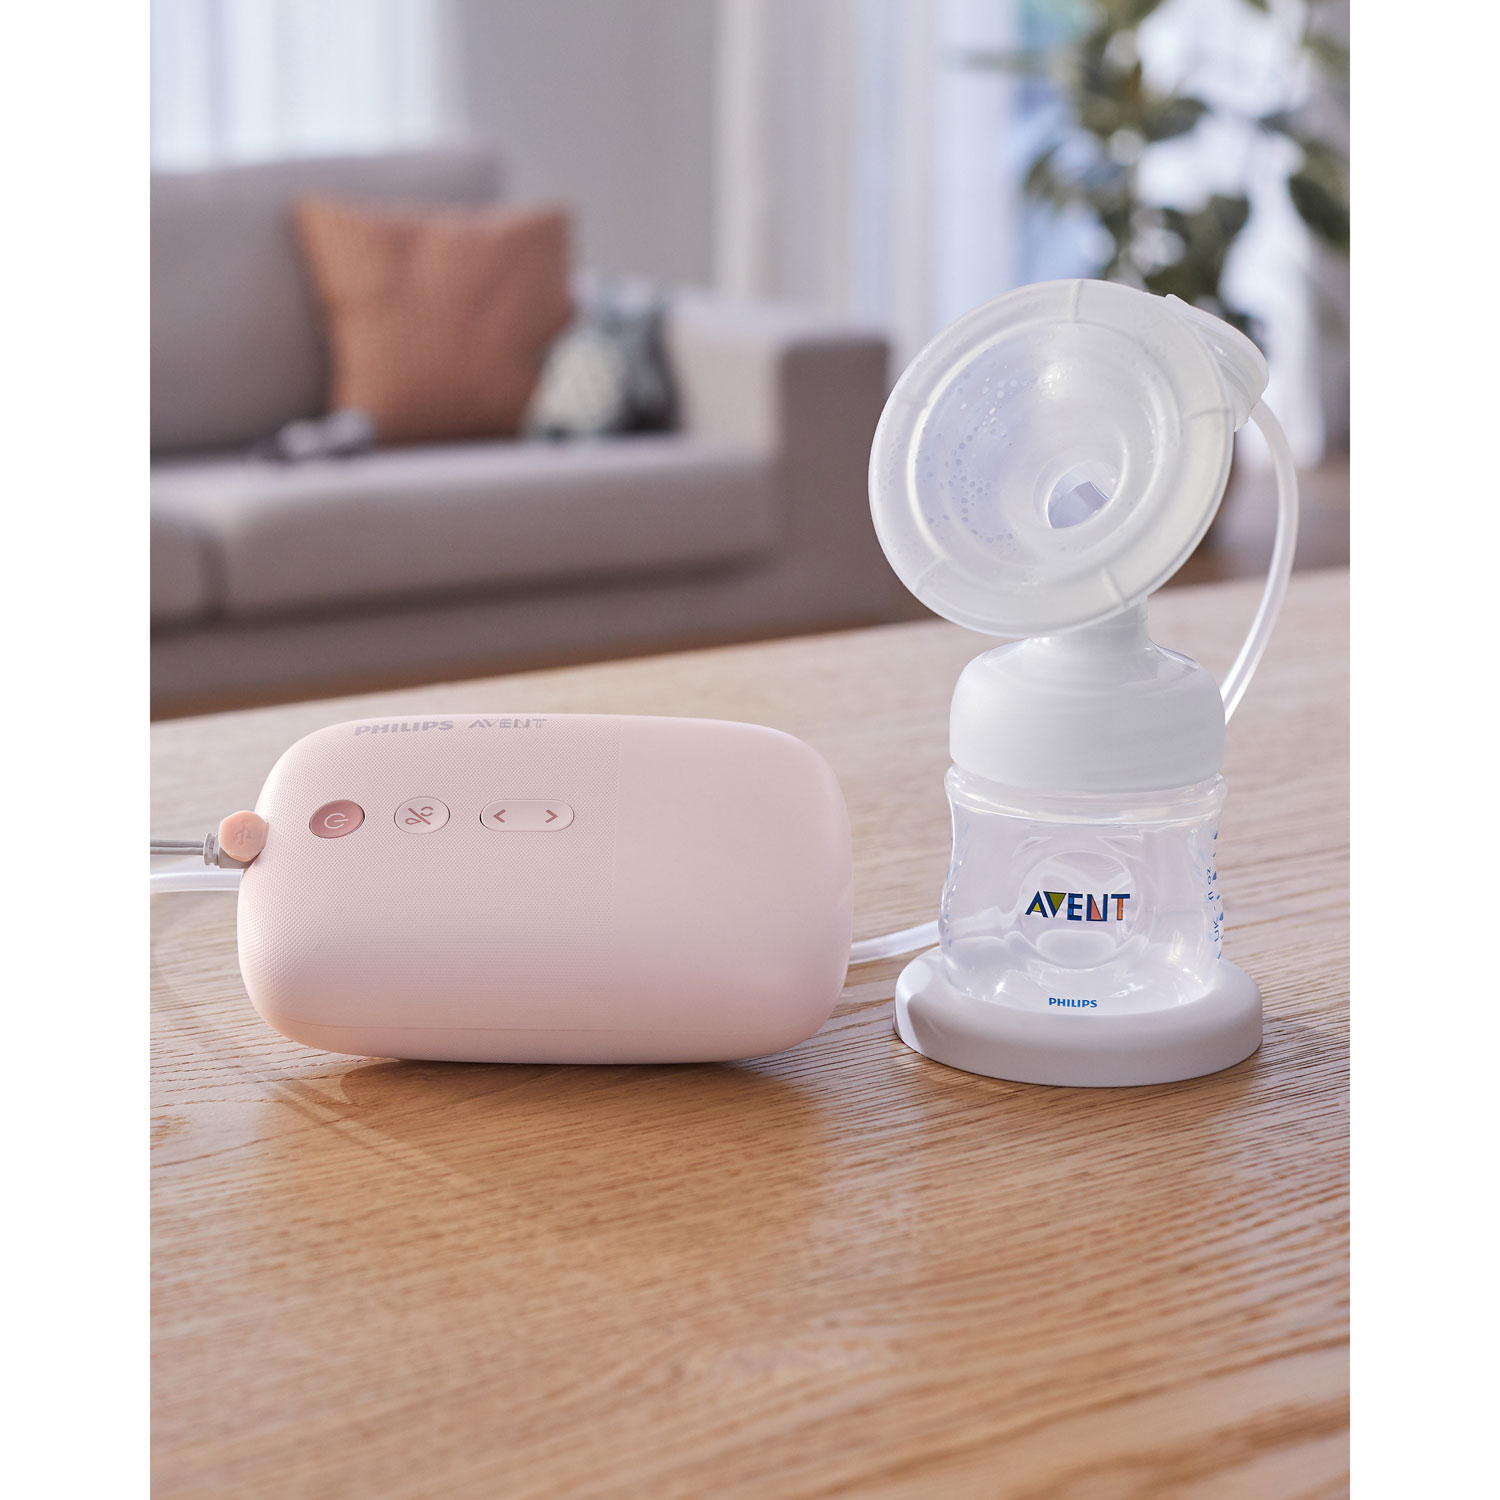 Philips AVENT Single Electric Breast Pump Advanced with Natural Motion  Technology, SCF391/62, Pump Light Pink, Bottle Clear